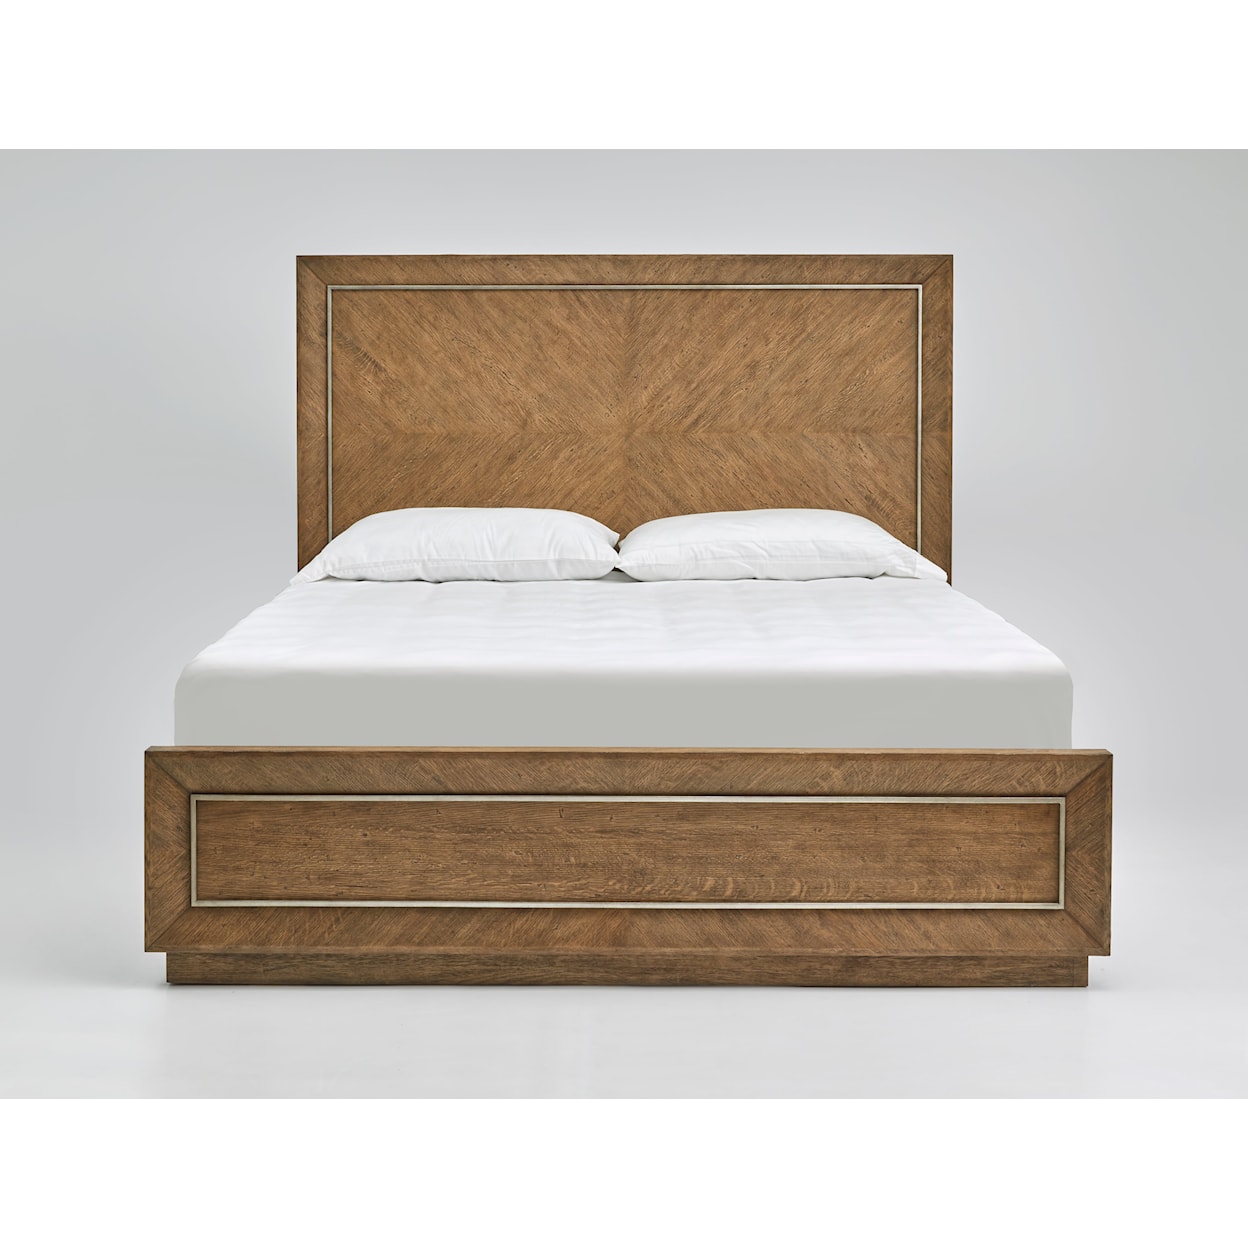 The Preserve Sugarland Cali. King Panel Bed